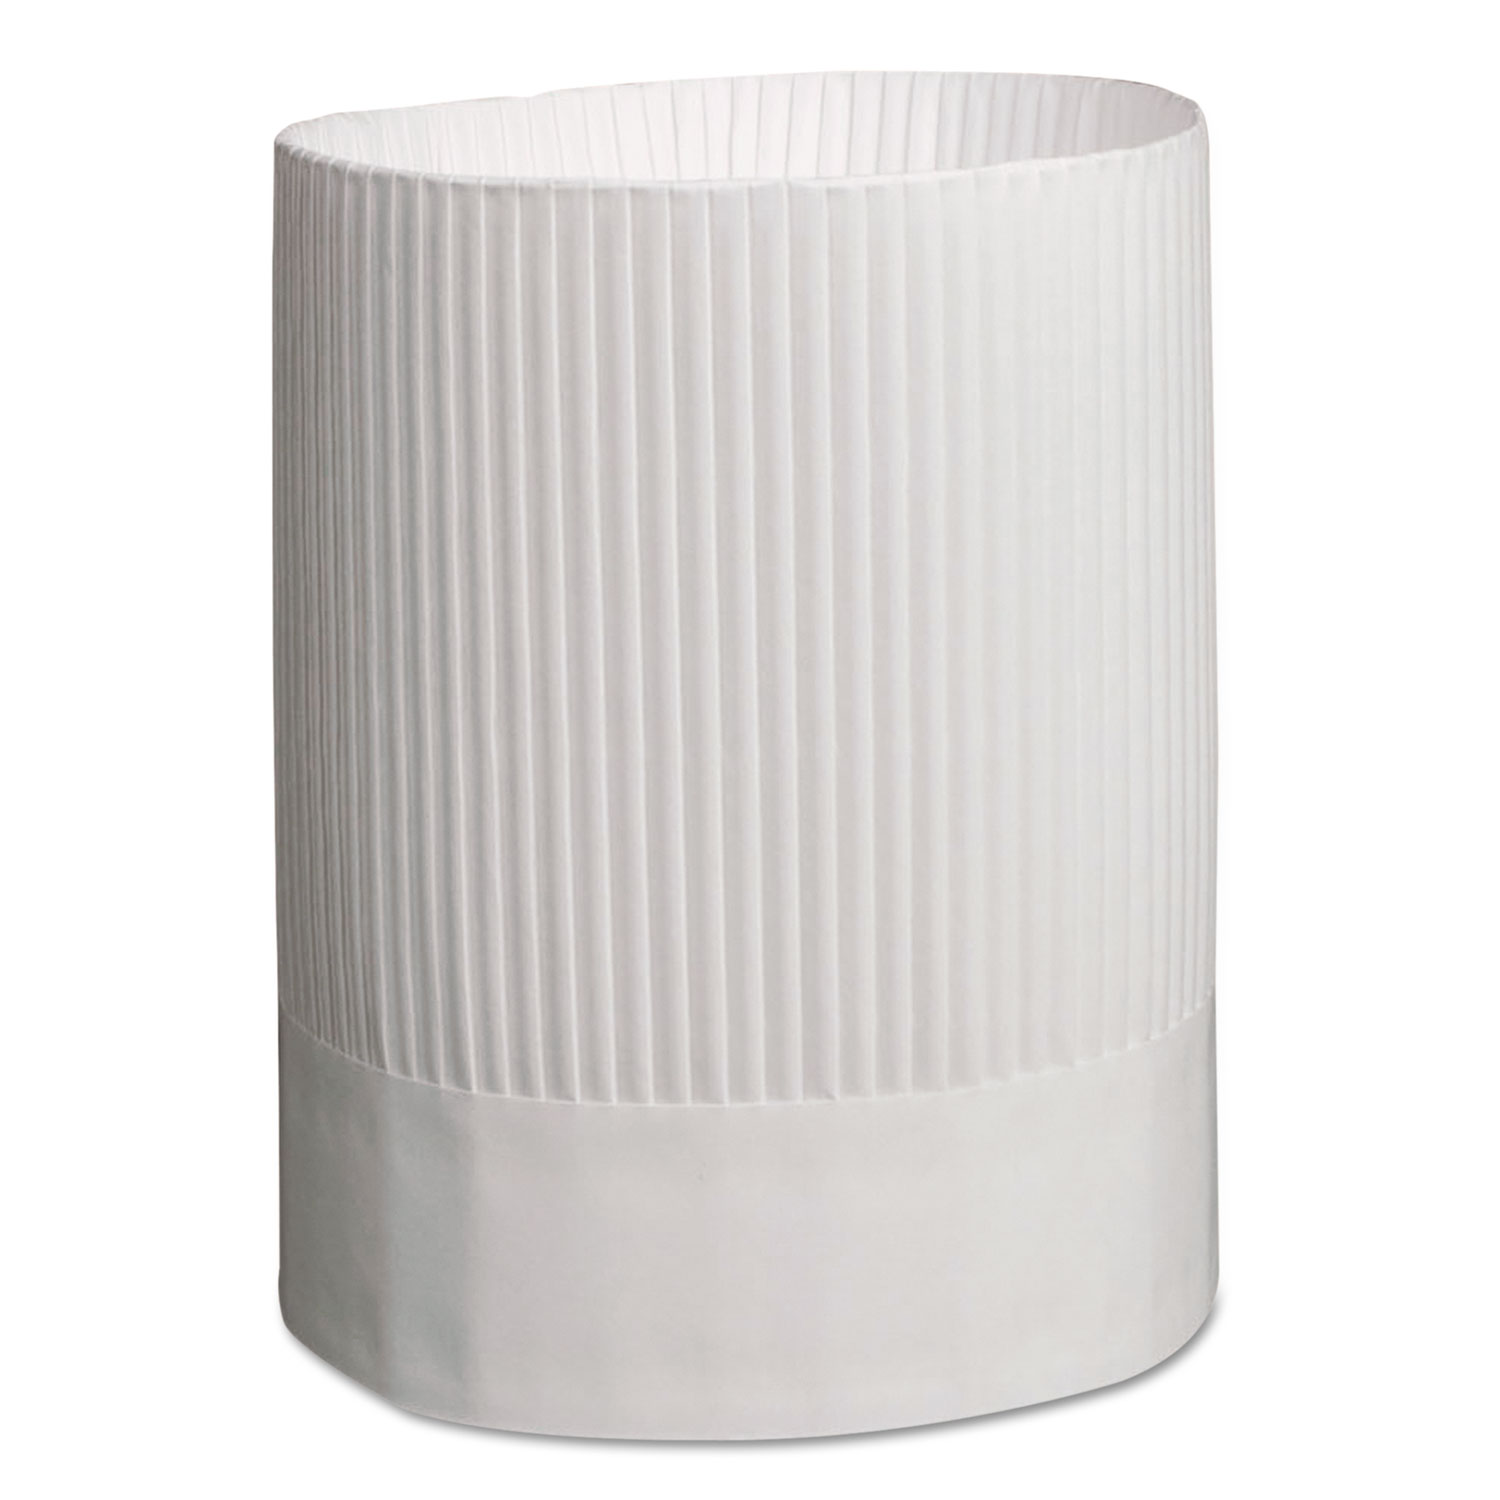 Stirling Fluted Chefs Hats, Paper, White, Adjustable, 9 in. Tall, 12/Carton